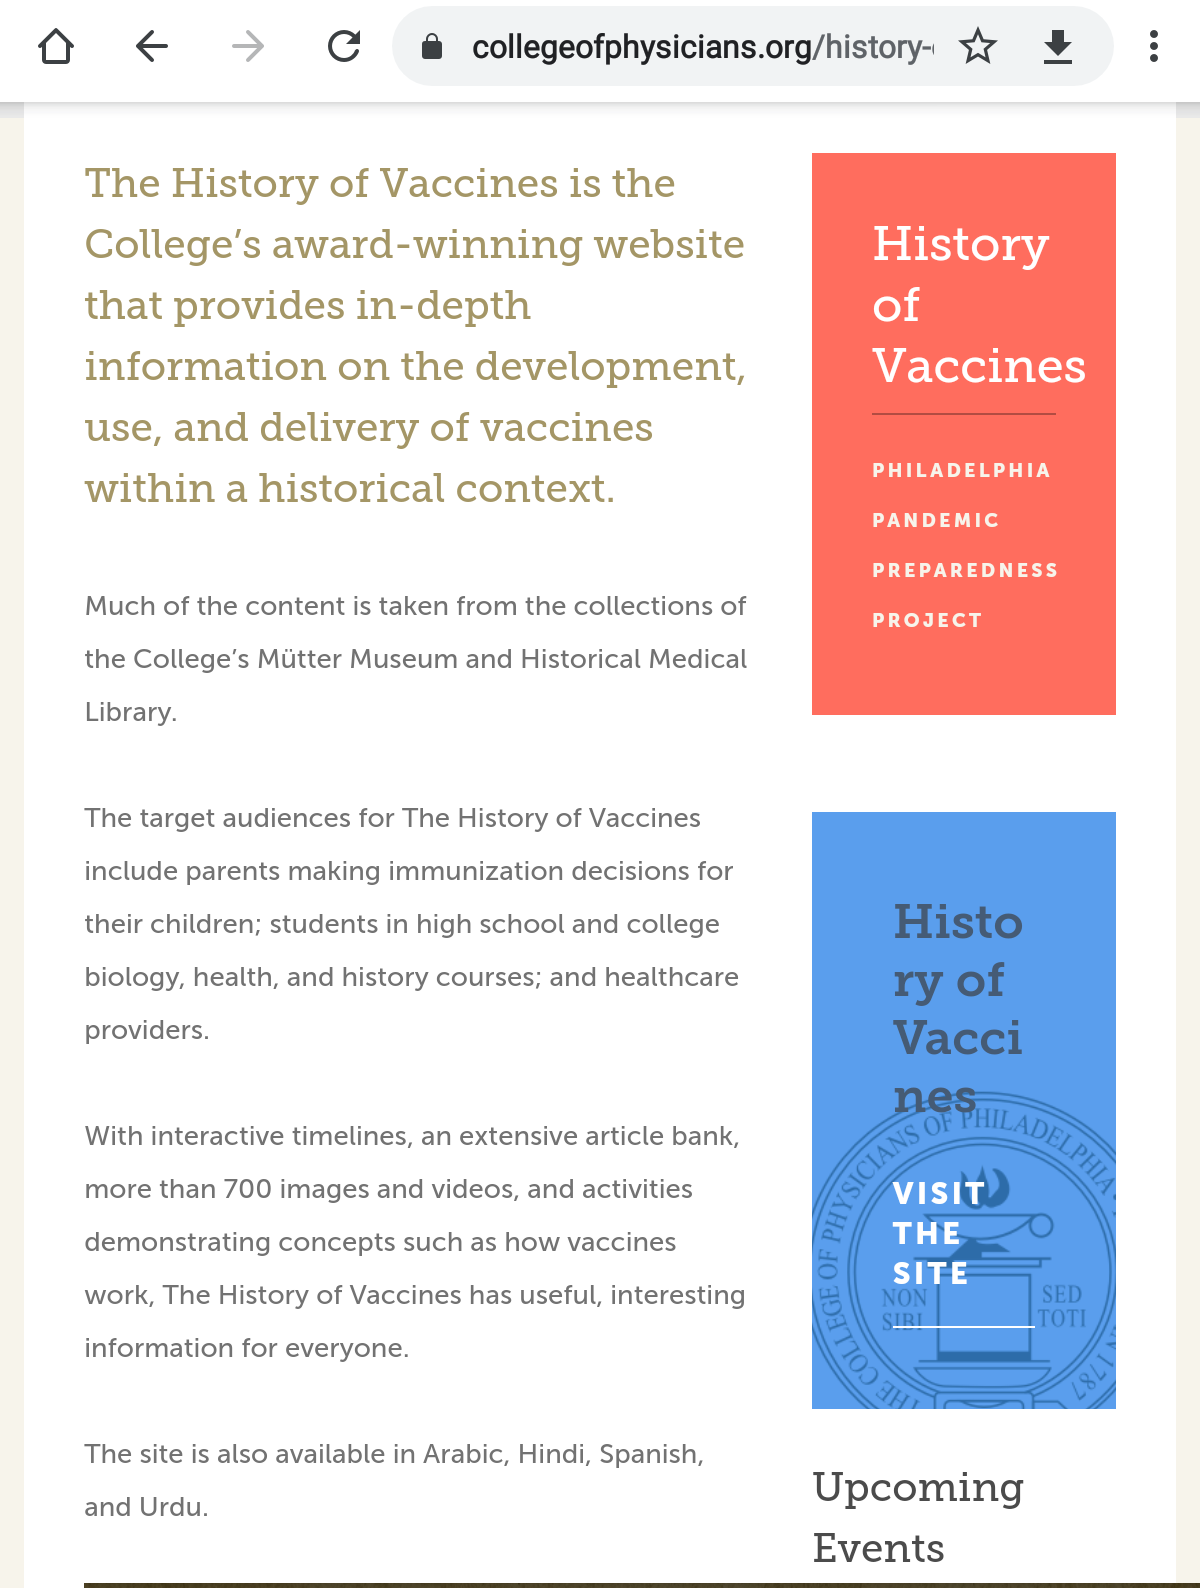 historyofvaccines~2.png